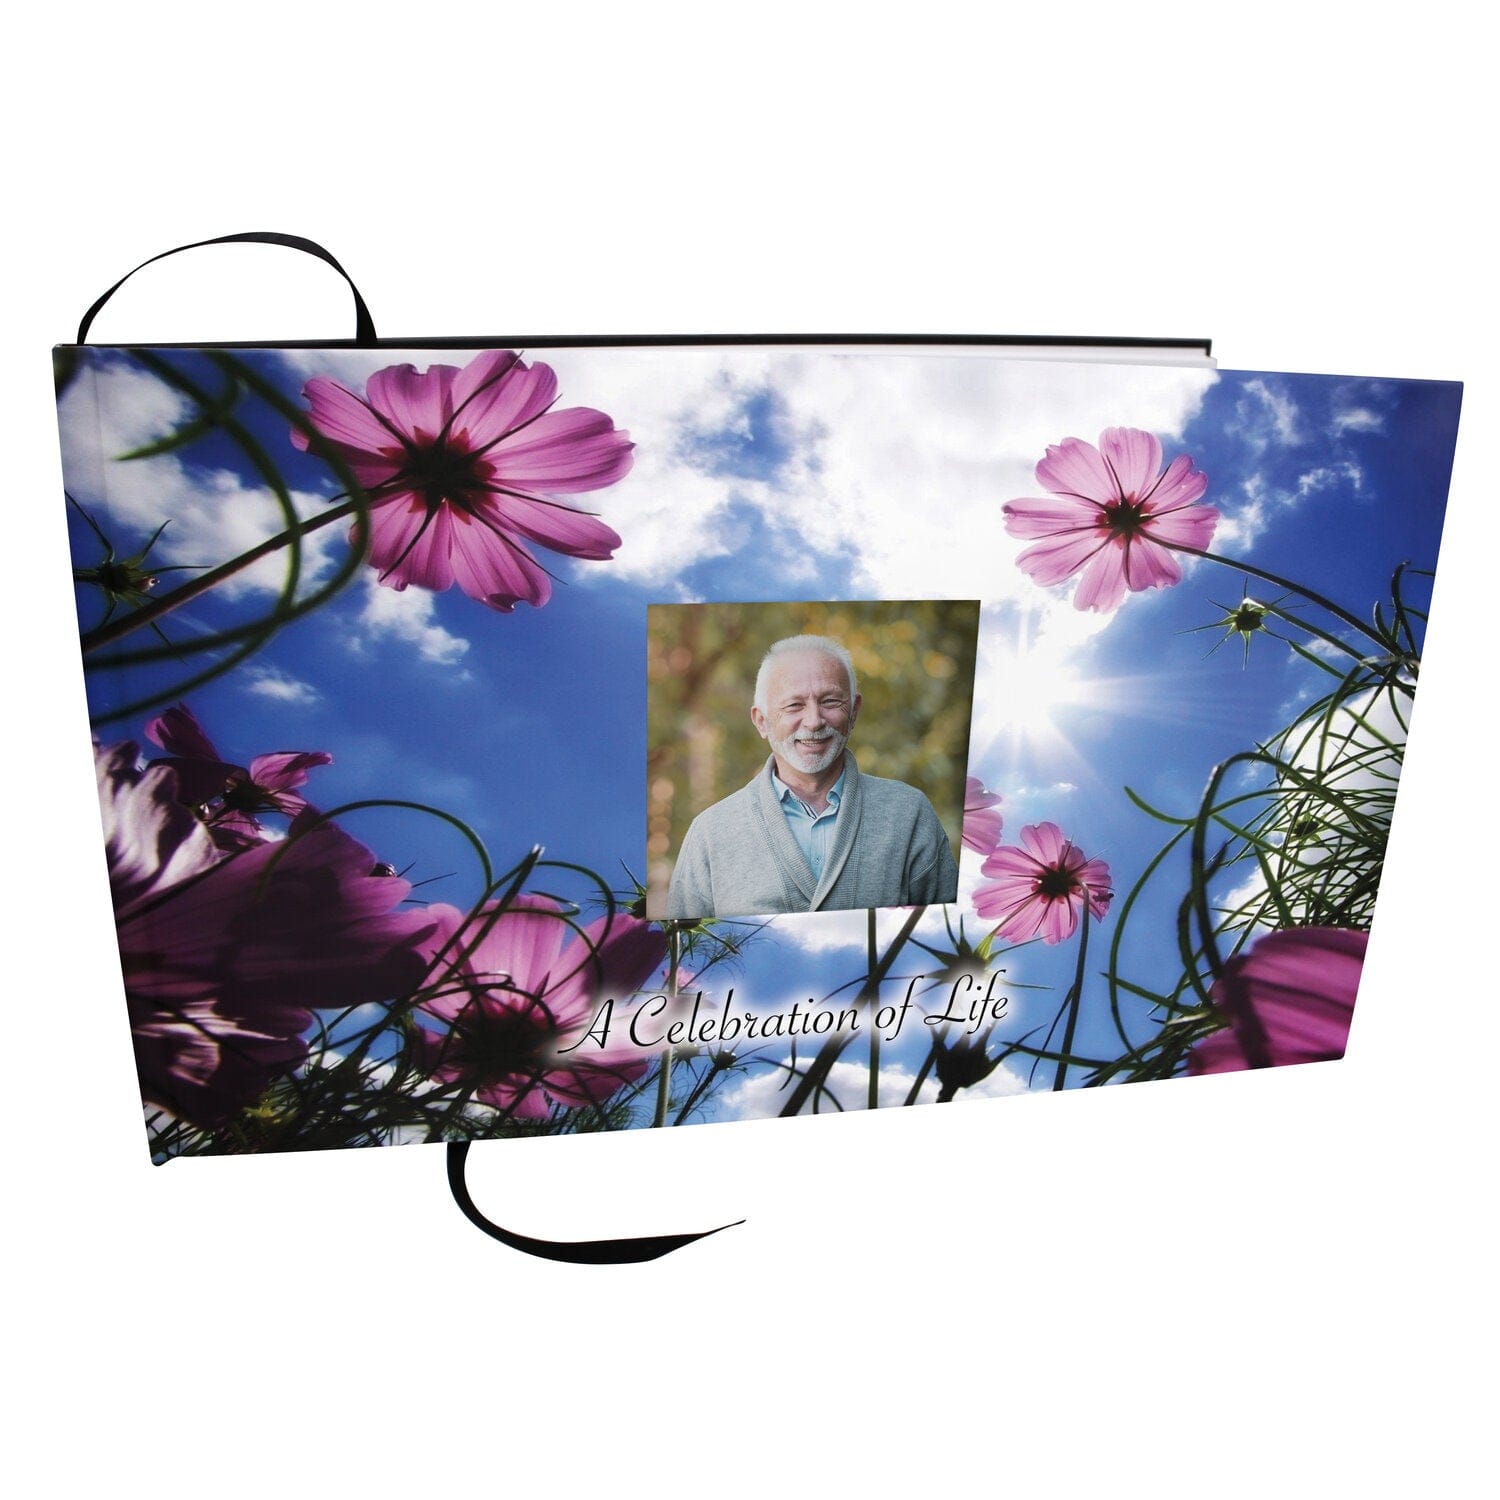 Commemorative Cremation Urns Morning Glories Matching Themed 'Celebration of Life' Guest Book for Funeral or Memorial Service